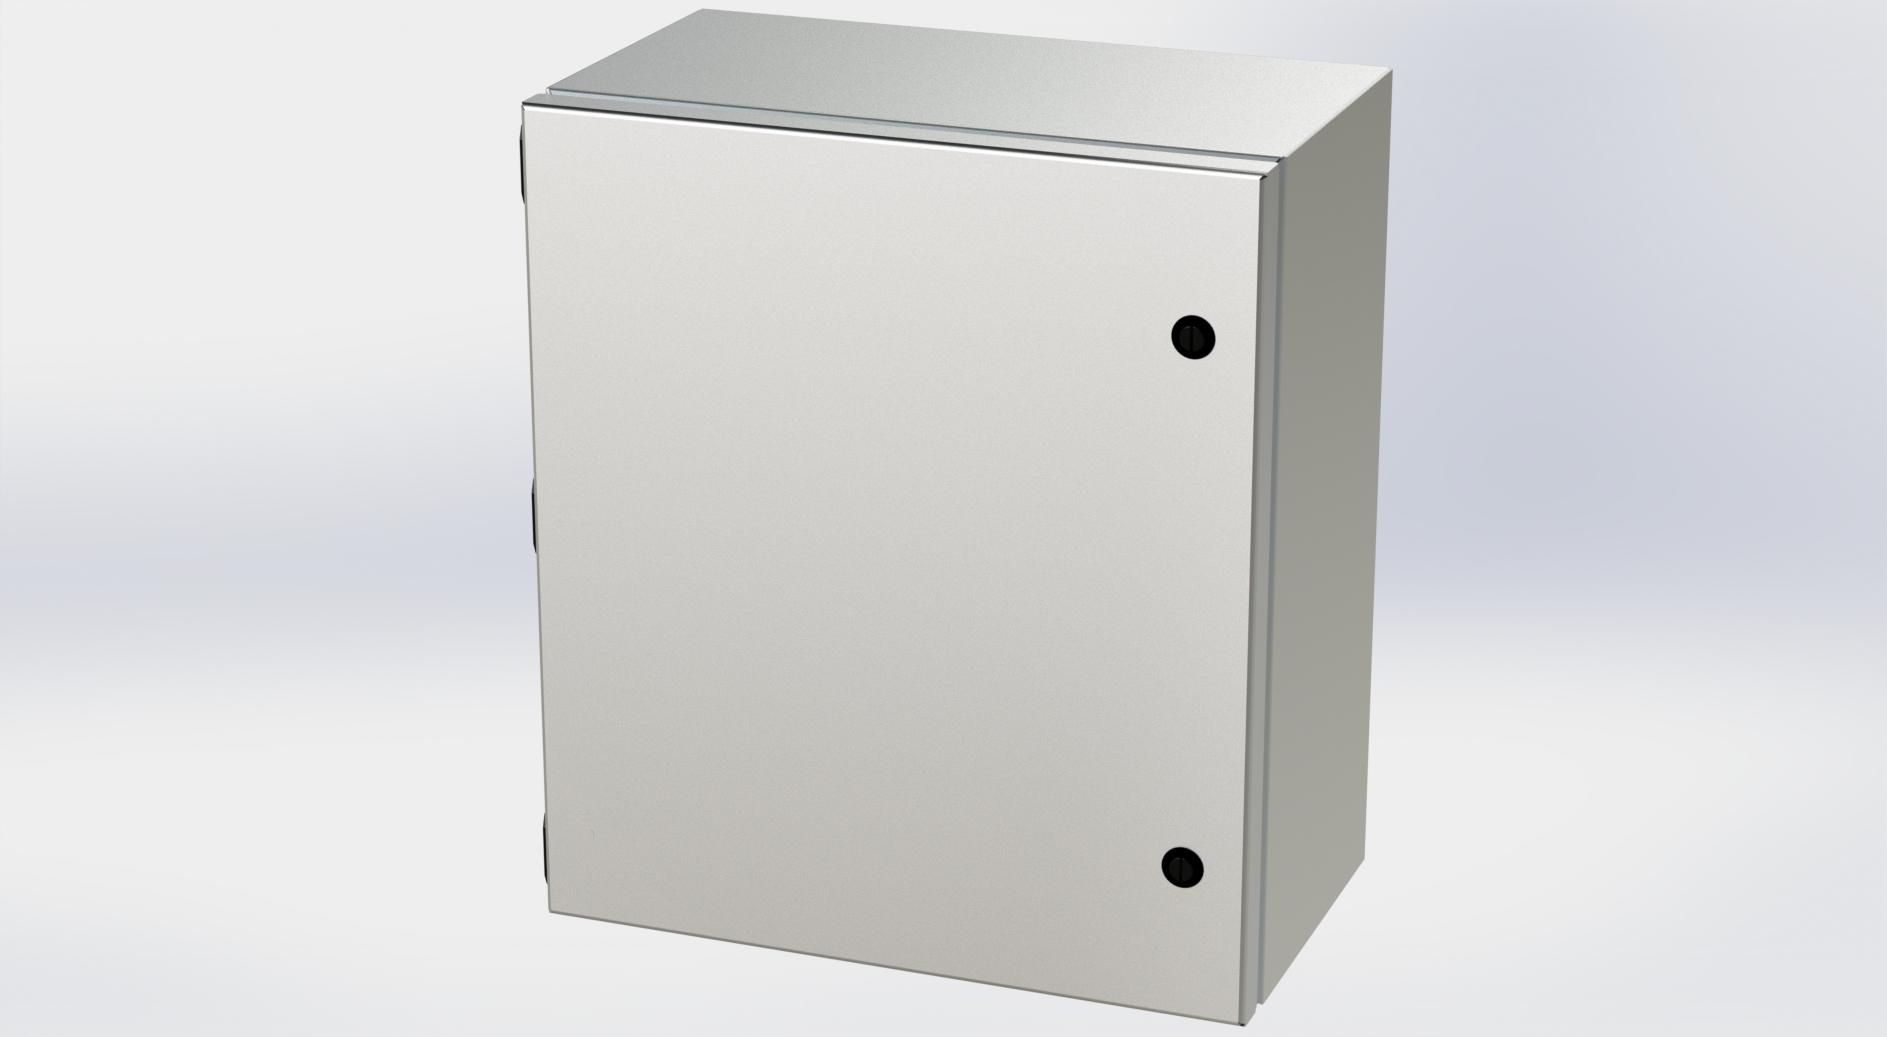 Saginaw Control SCE-16148ELJSS6 S.S. ELJ Enclosure, Height:16.00", Width:14.00", Depth:8.00", #4 brushed finish on all exterior surfaces. Optional sub-panels are powder coated white.